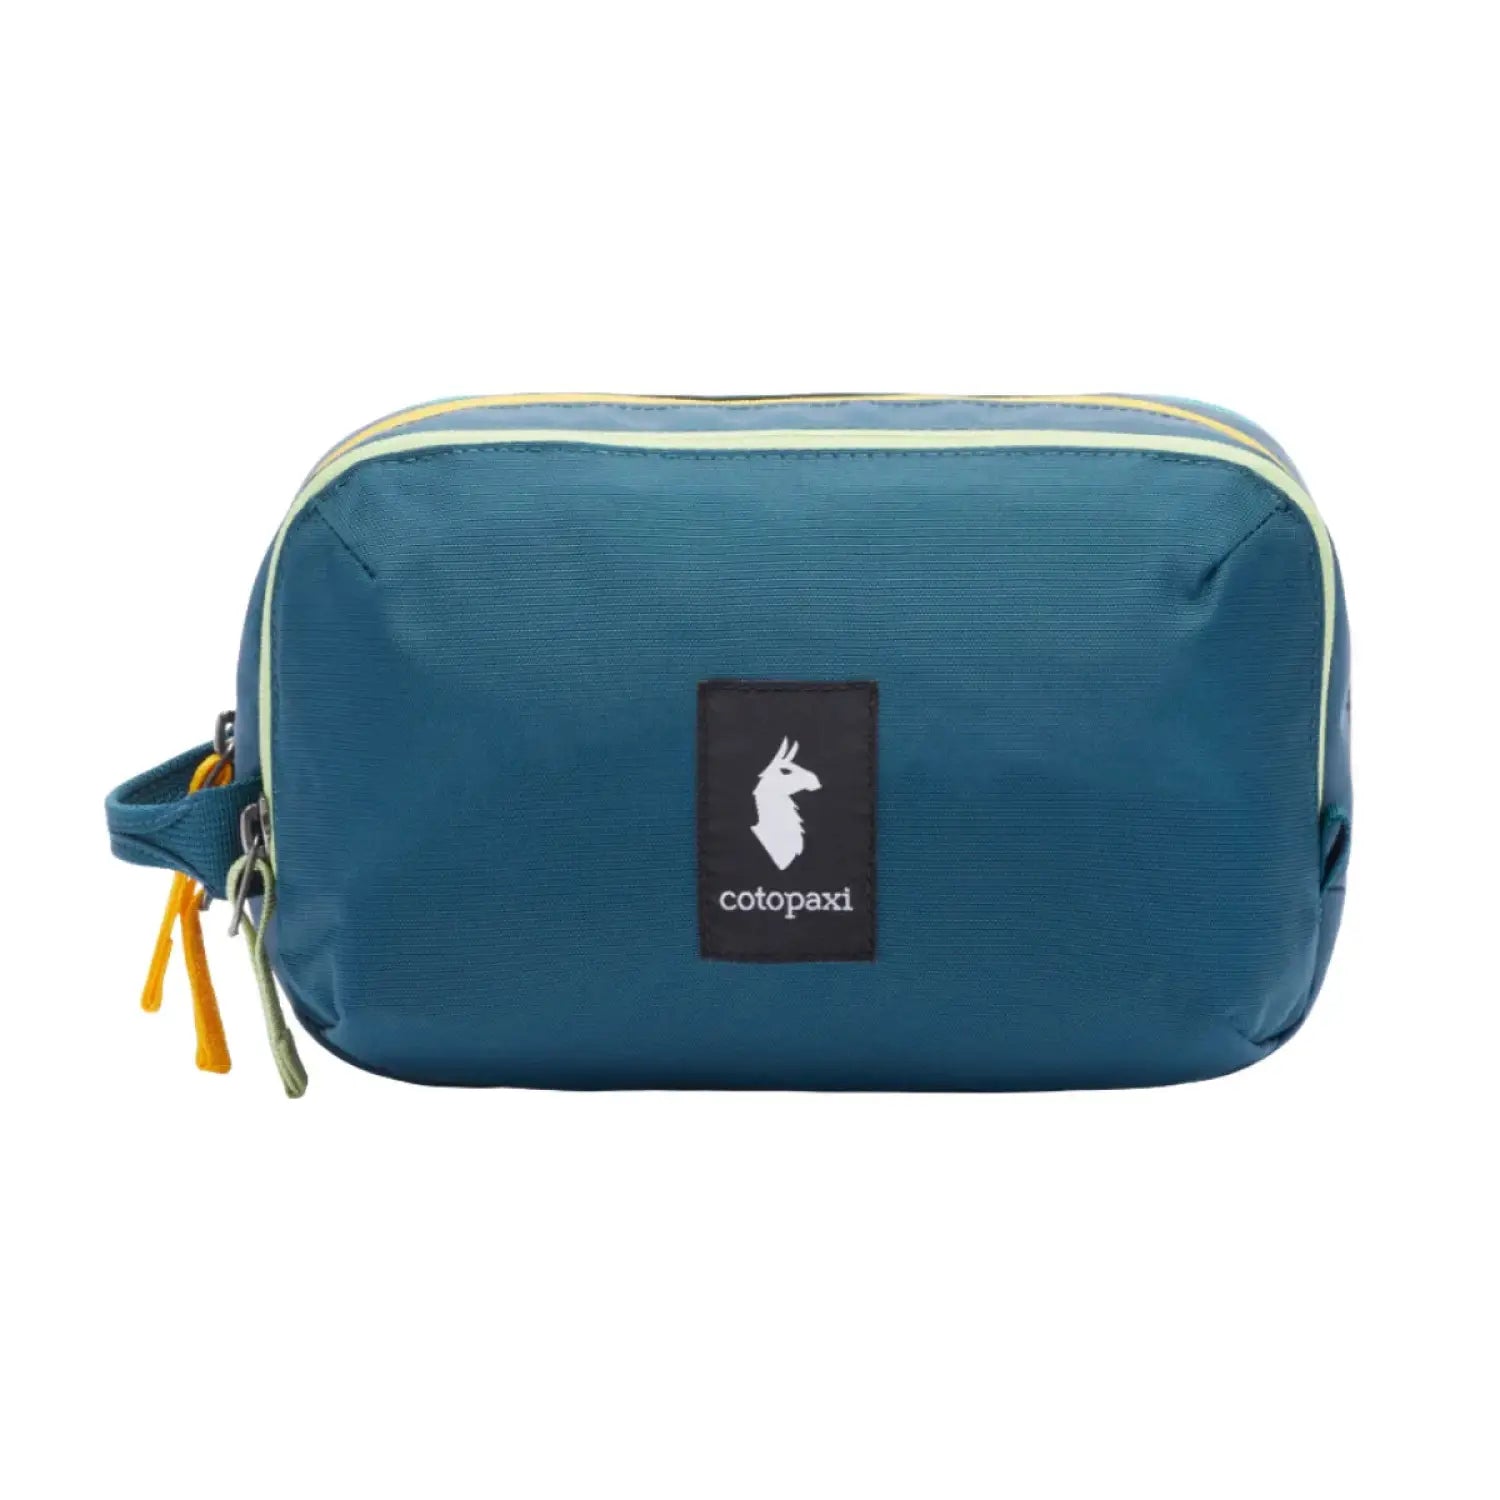 Cotopaxi Nido Accessory Bag - Cada Día, Abyss, front view flat 